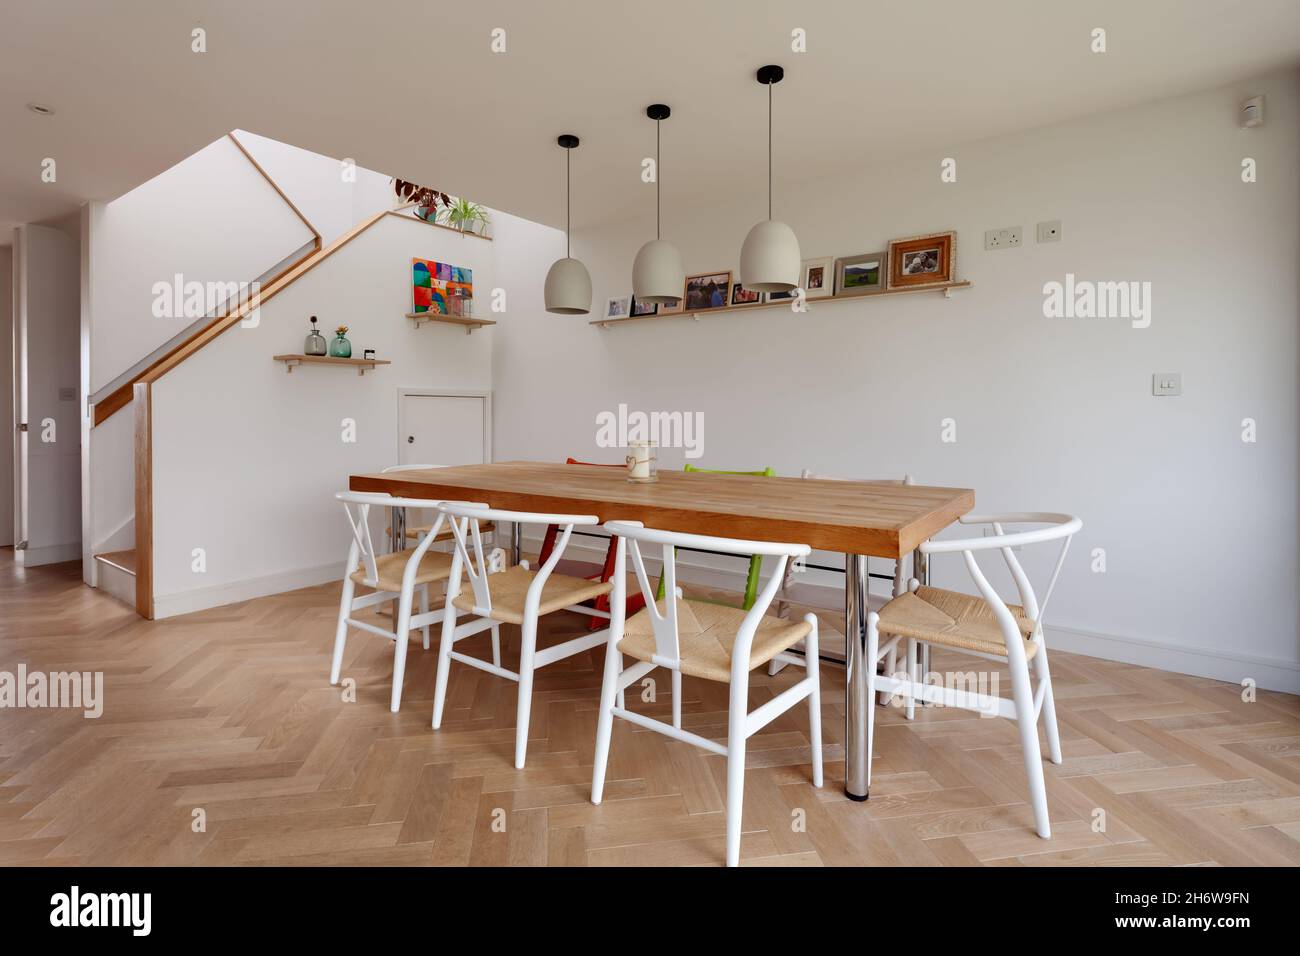 Dry Drayton, England - August 2 2019: Contemporary dining area with generously sized table, chairs and striking parquet floor. Stock Photo